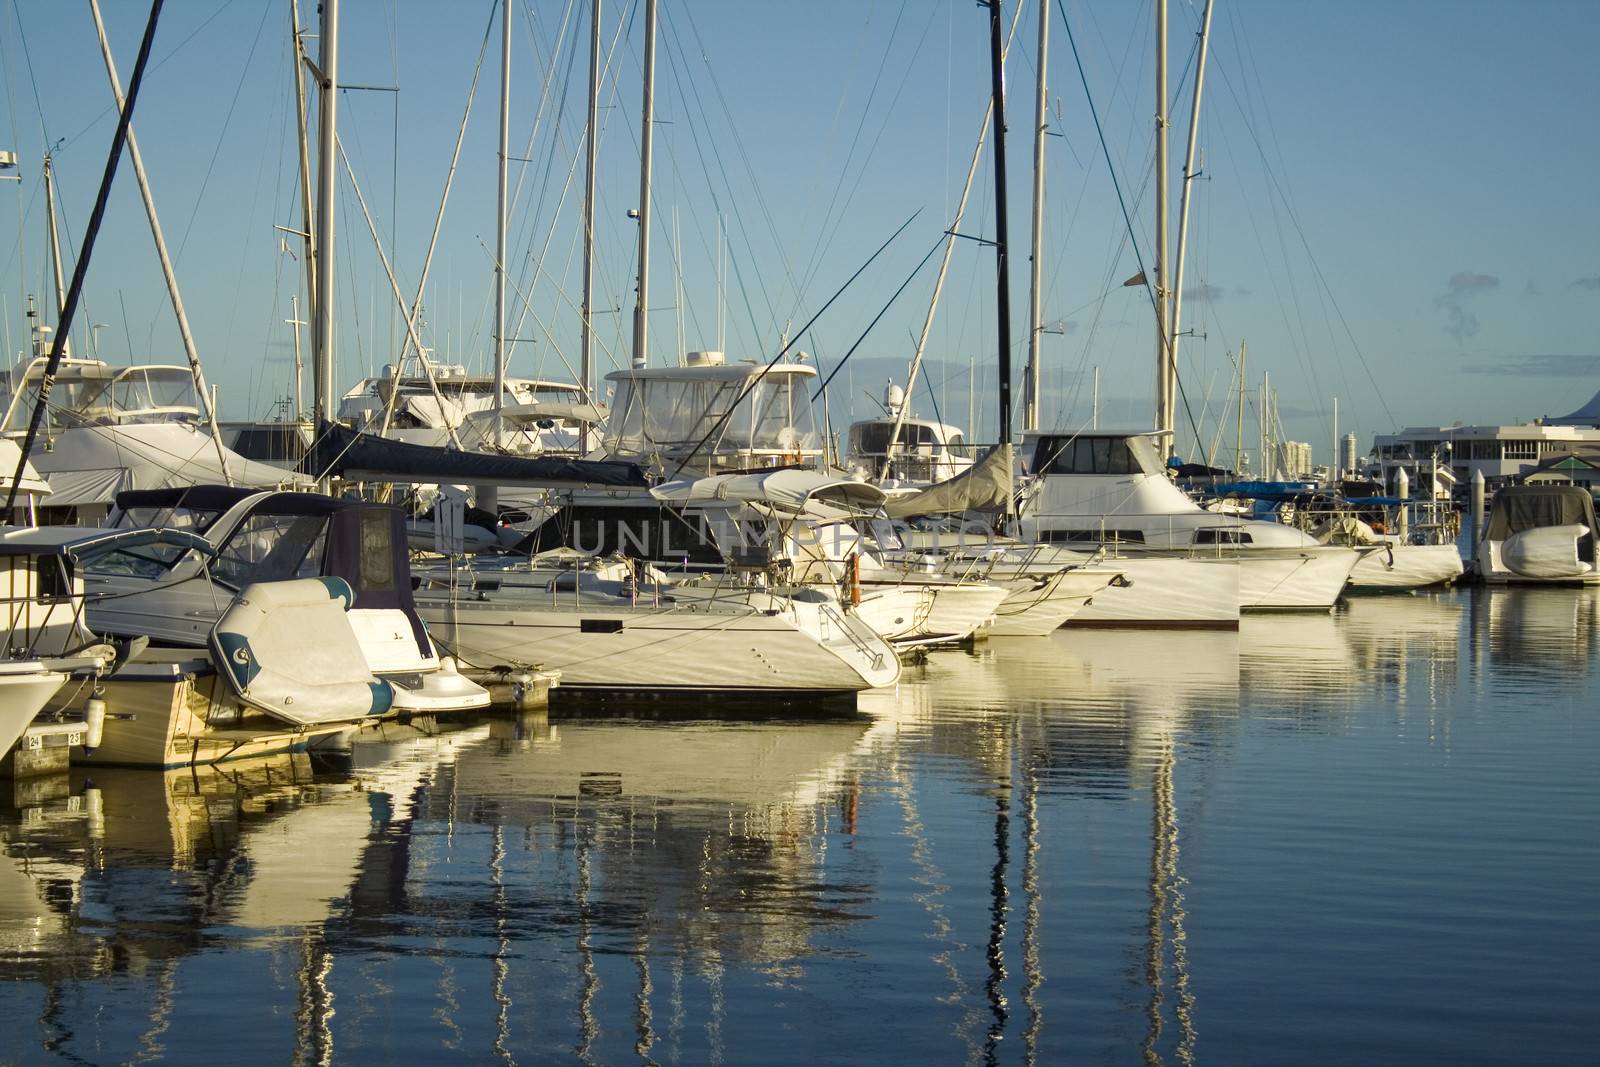 Boats and yachts lined up at the marina in the early morning golden light.